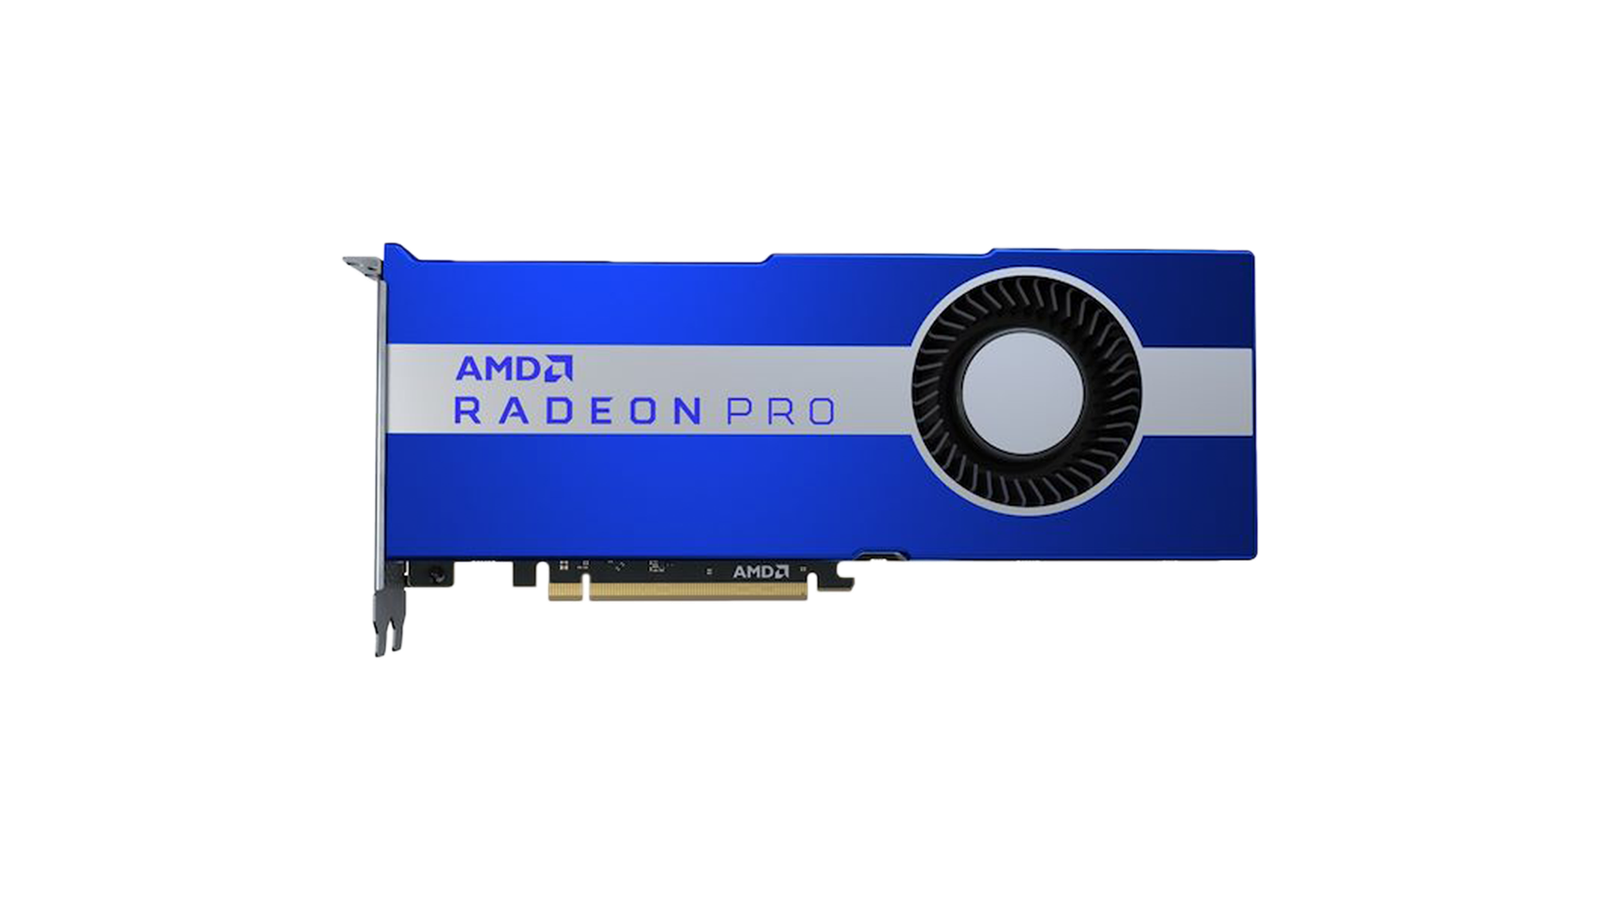 AMD Radeon Pro W6800 - The best AMD graphics card for professional video editing